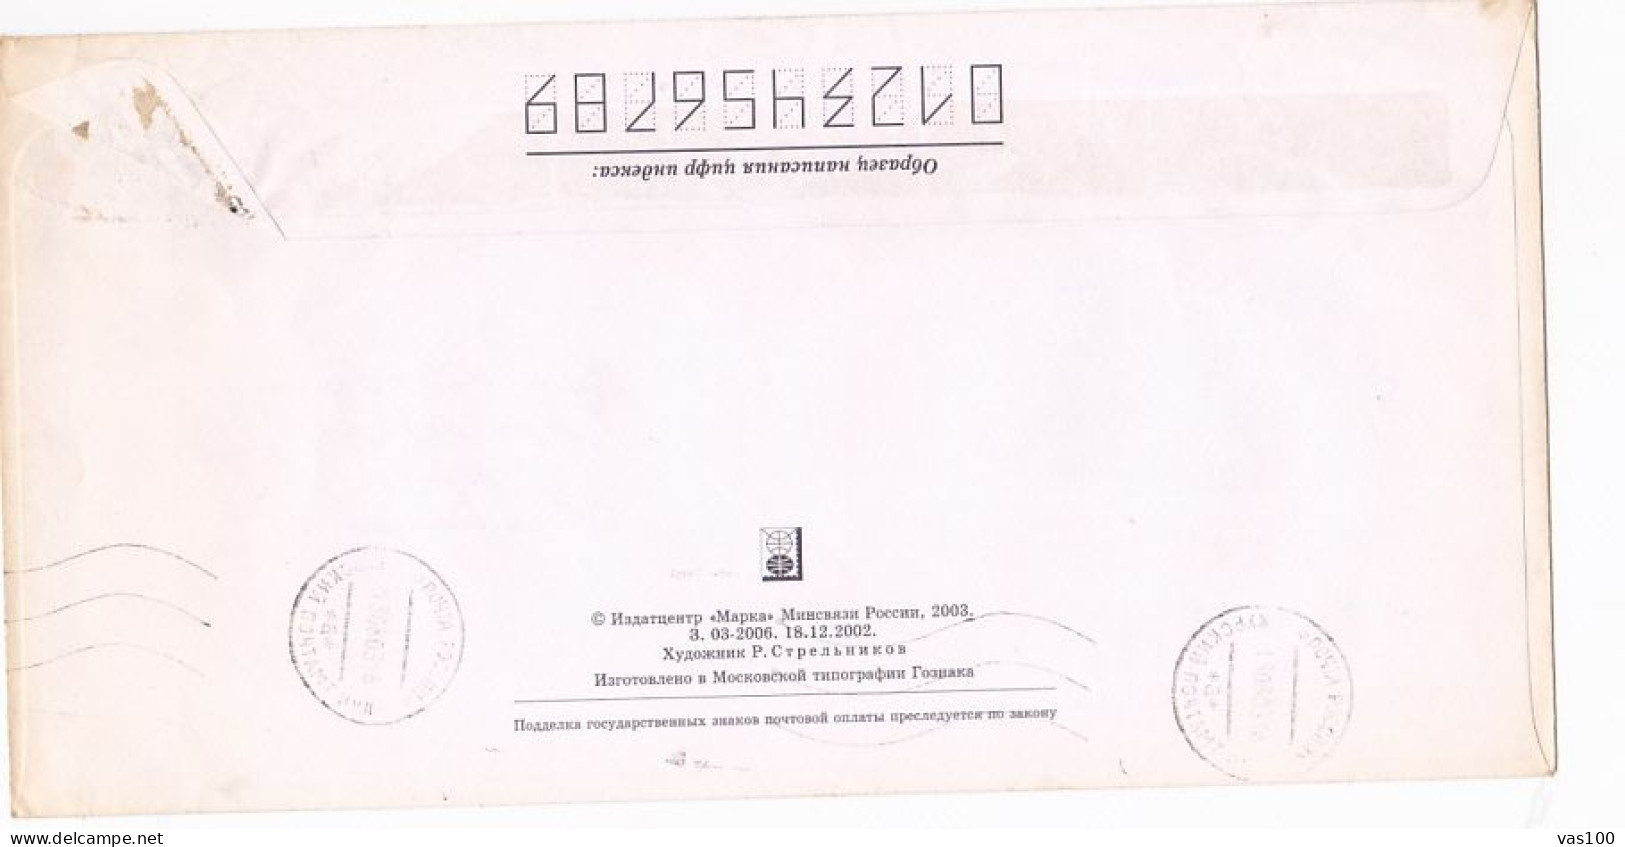 YURI LYSIANSKYI EXPEDITION AROUND THE WORLD, SHIPS, COVER STATIONERY, ENTIER POSTAL, 2003, RUSSIA - Stamped Stationery